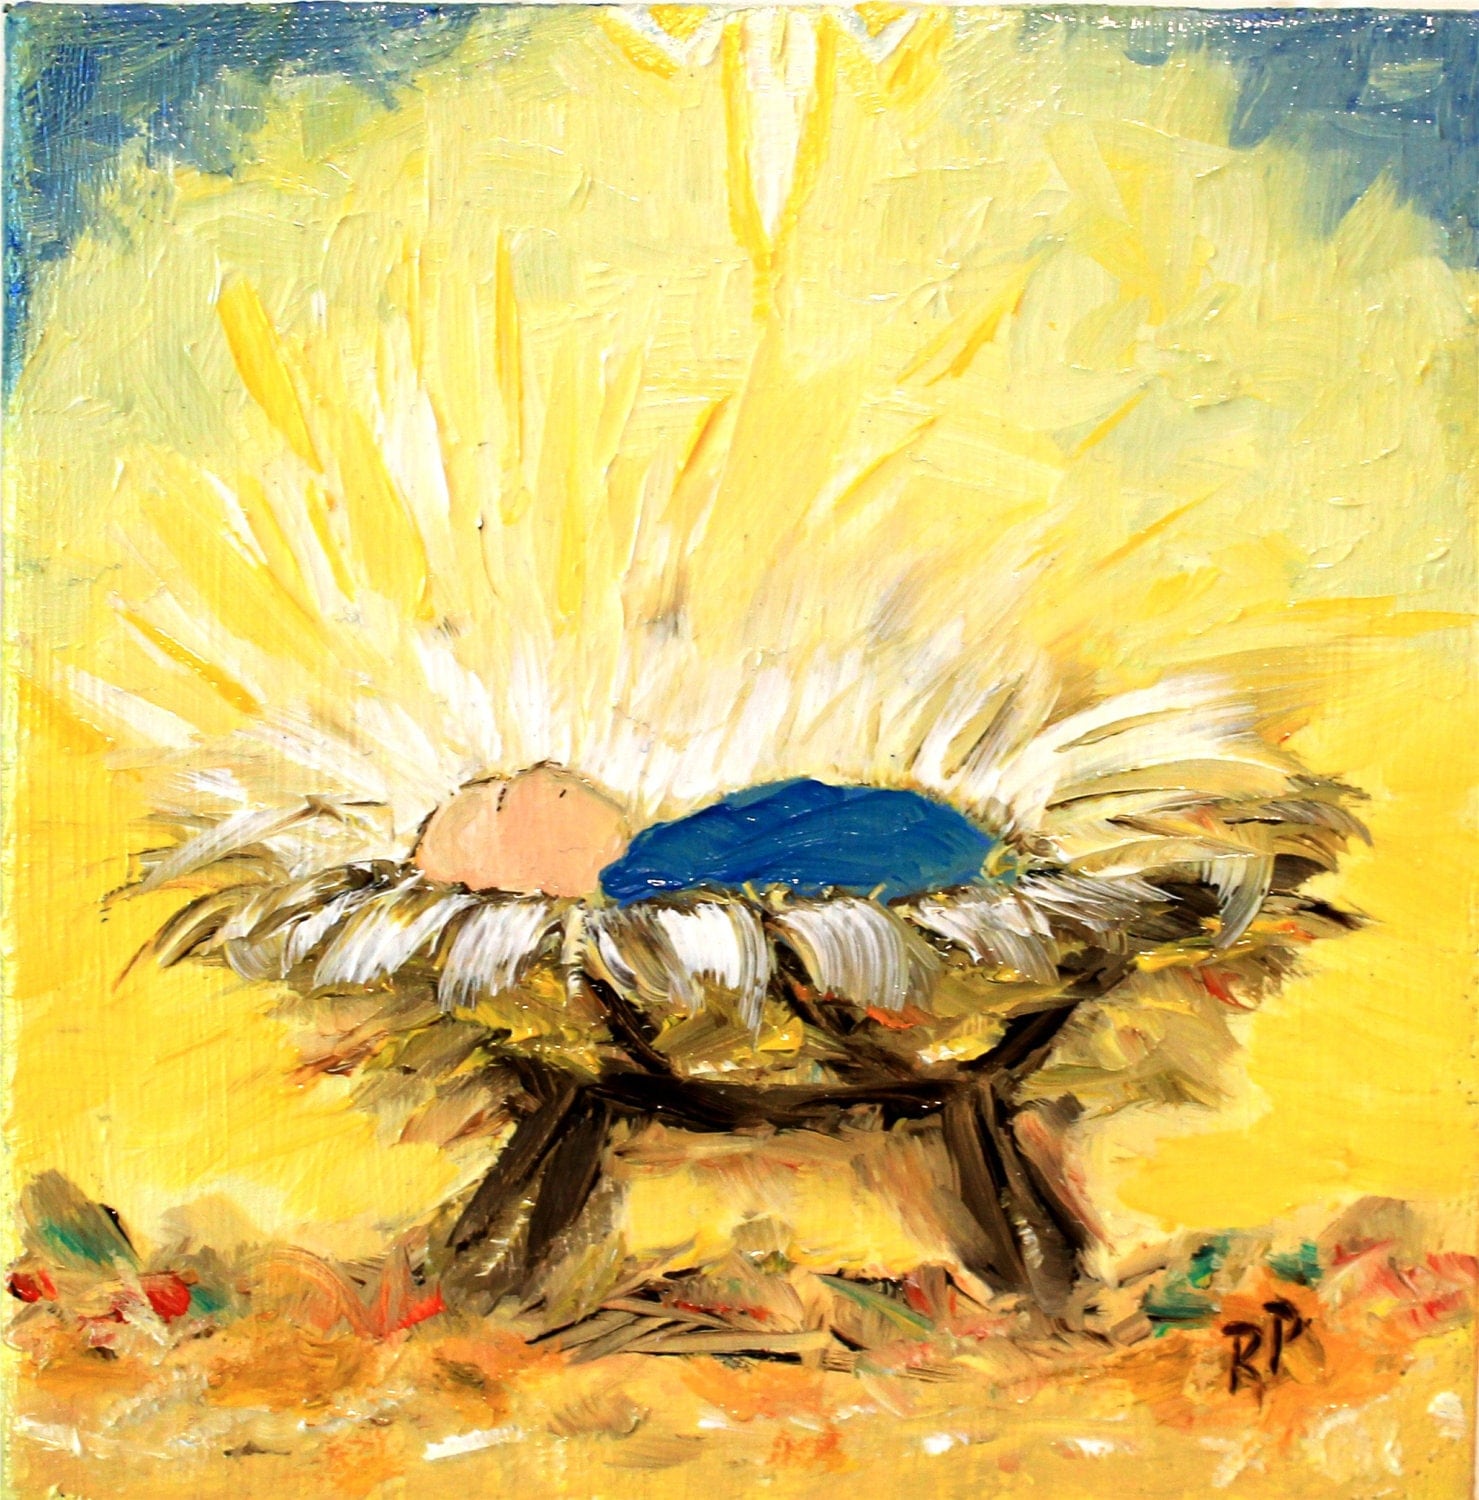 Baby In Manger Nativity Of Jesus 5 X 5 On Bright Yellow